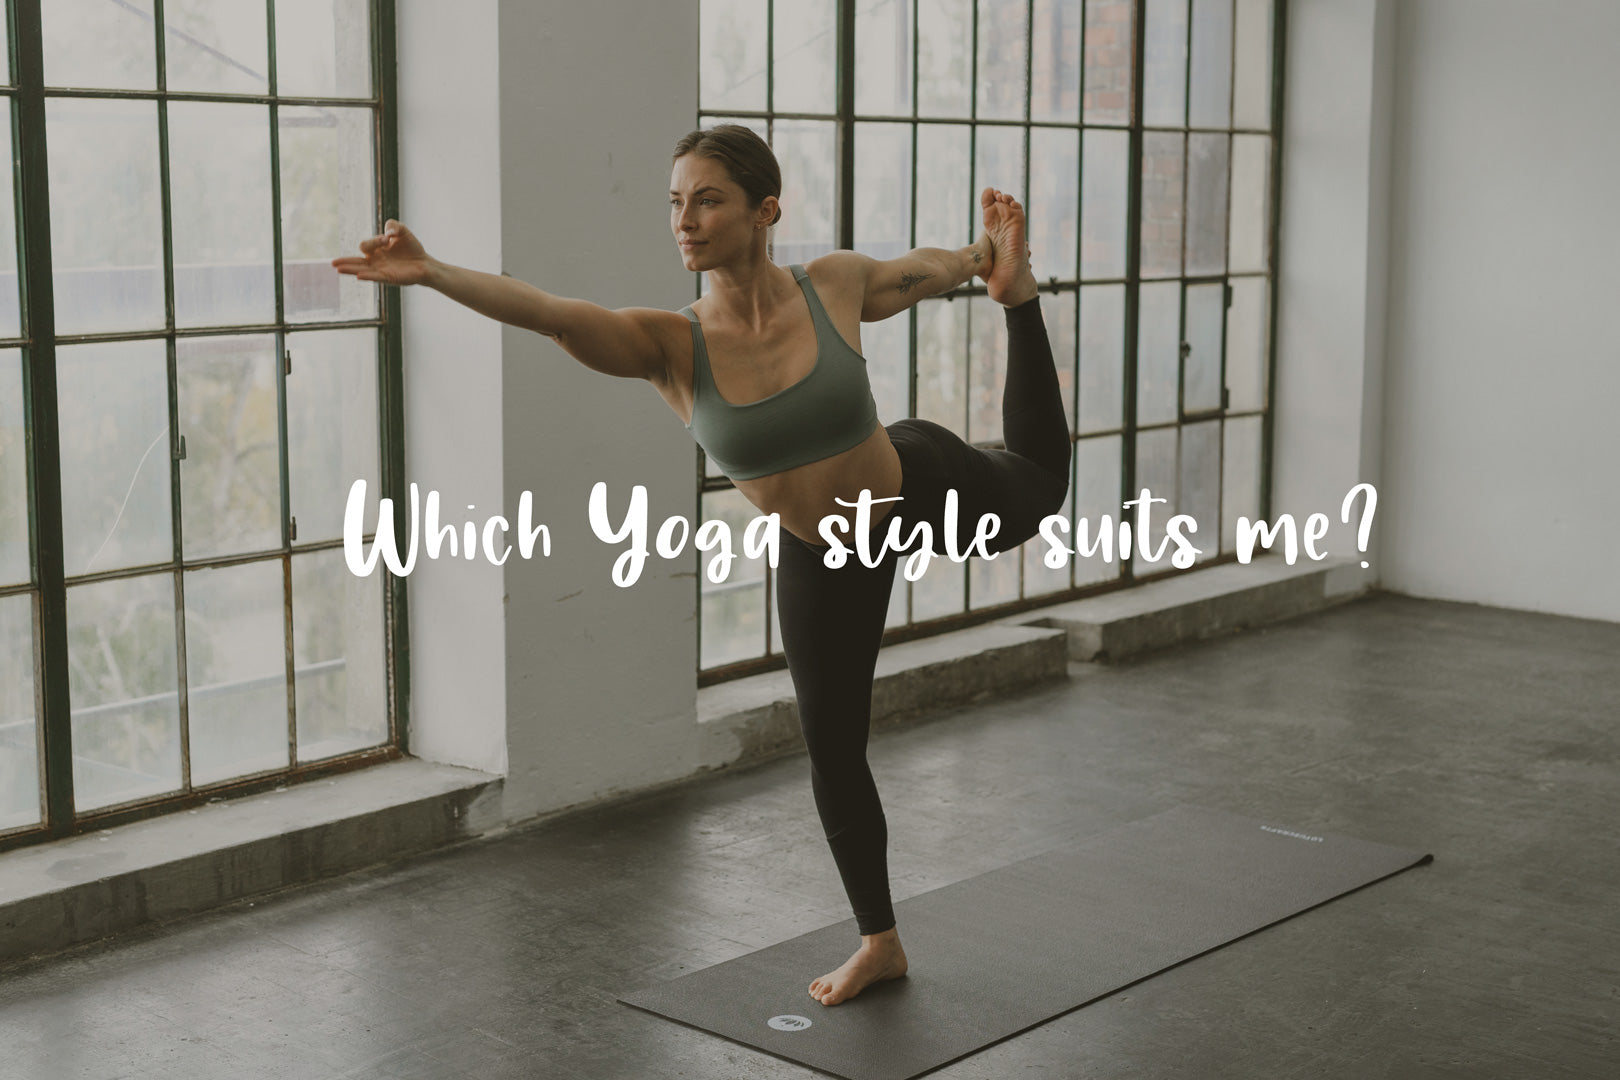 Which yoga style suits me best?